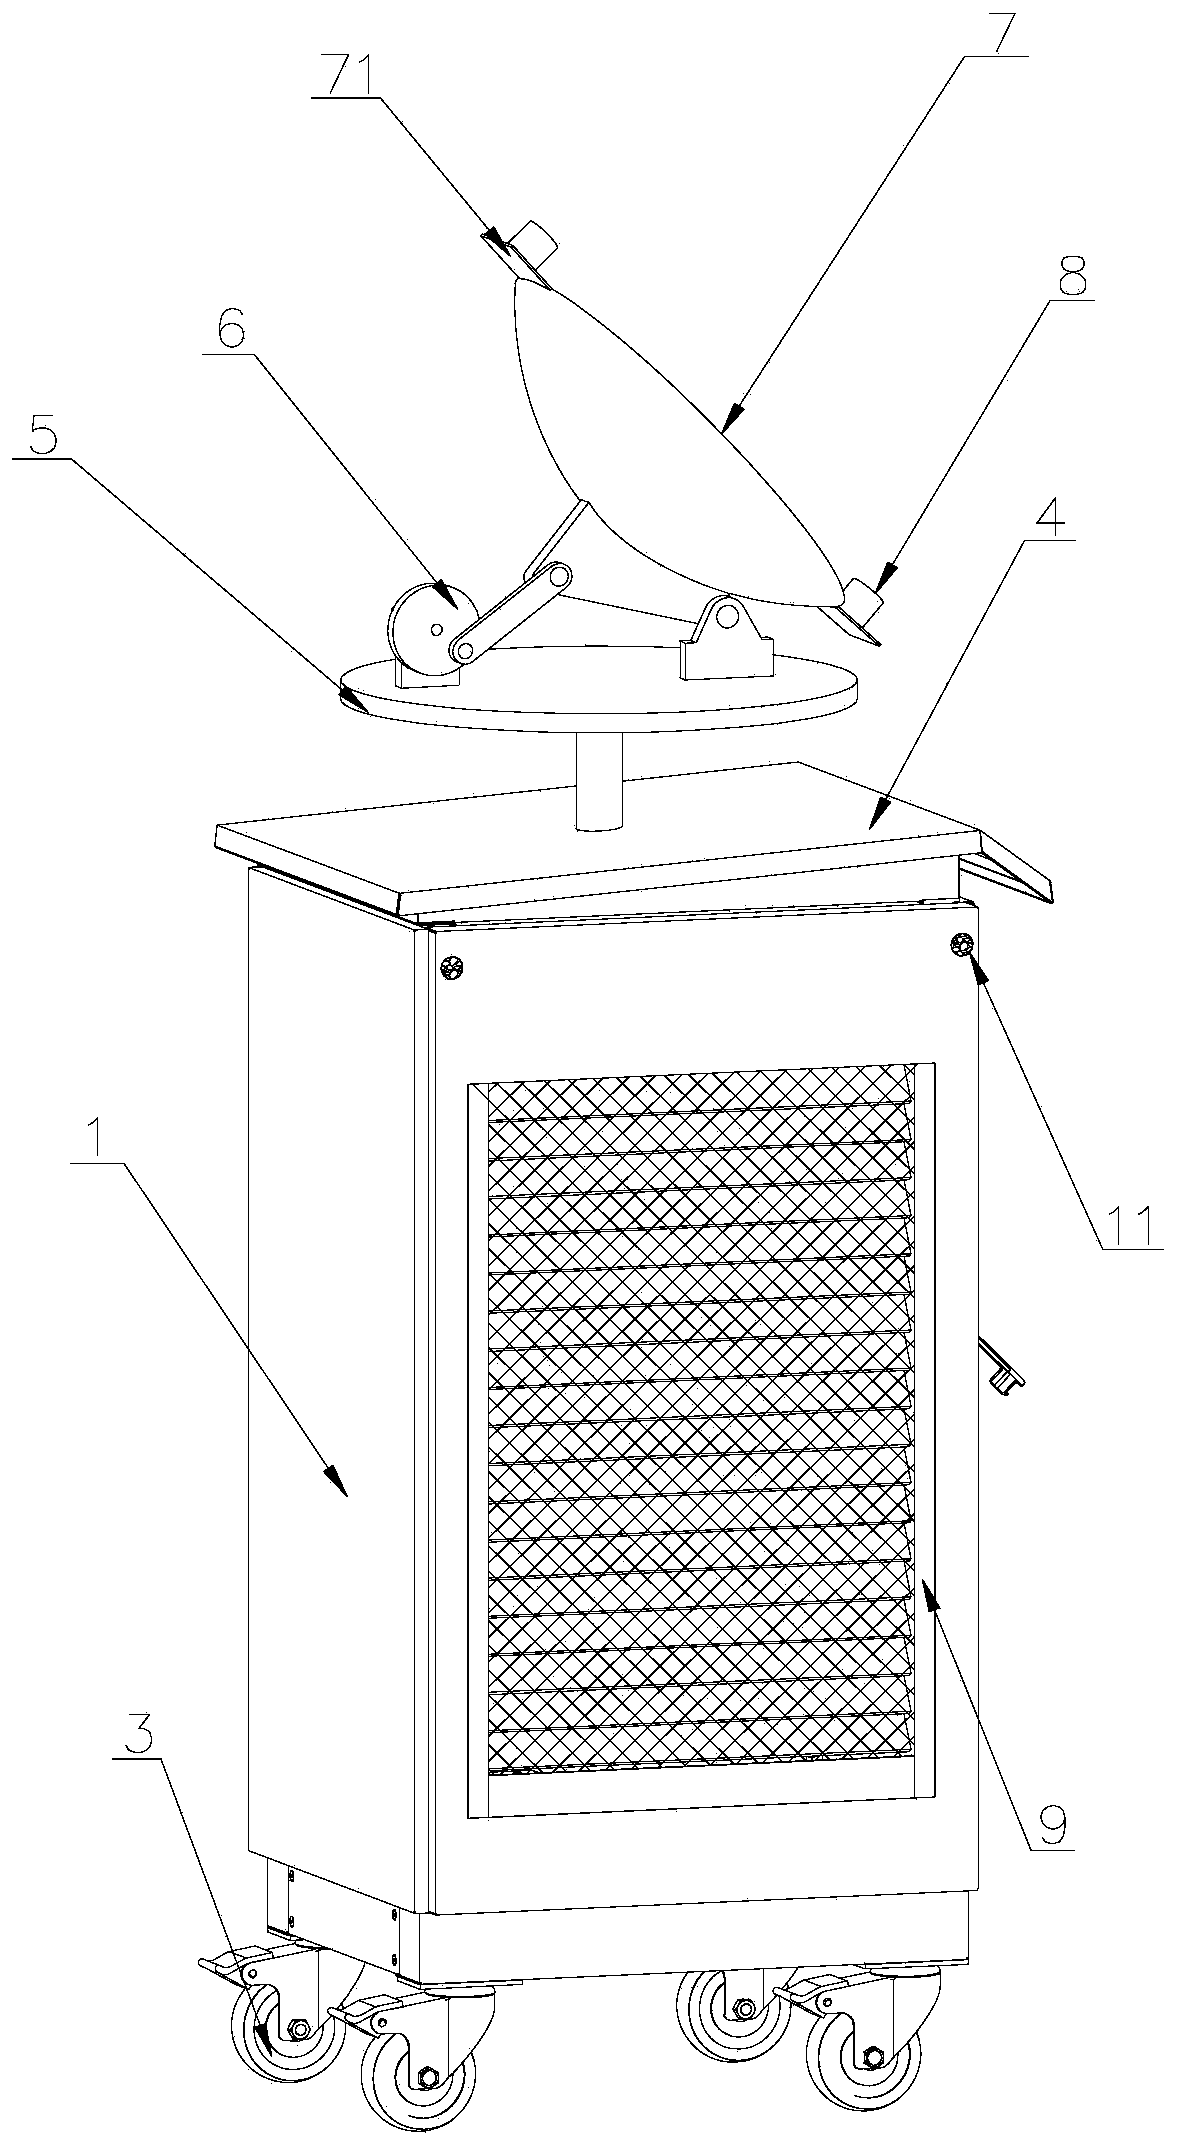 Mobile cooling device for power cabinet